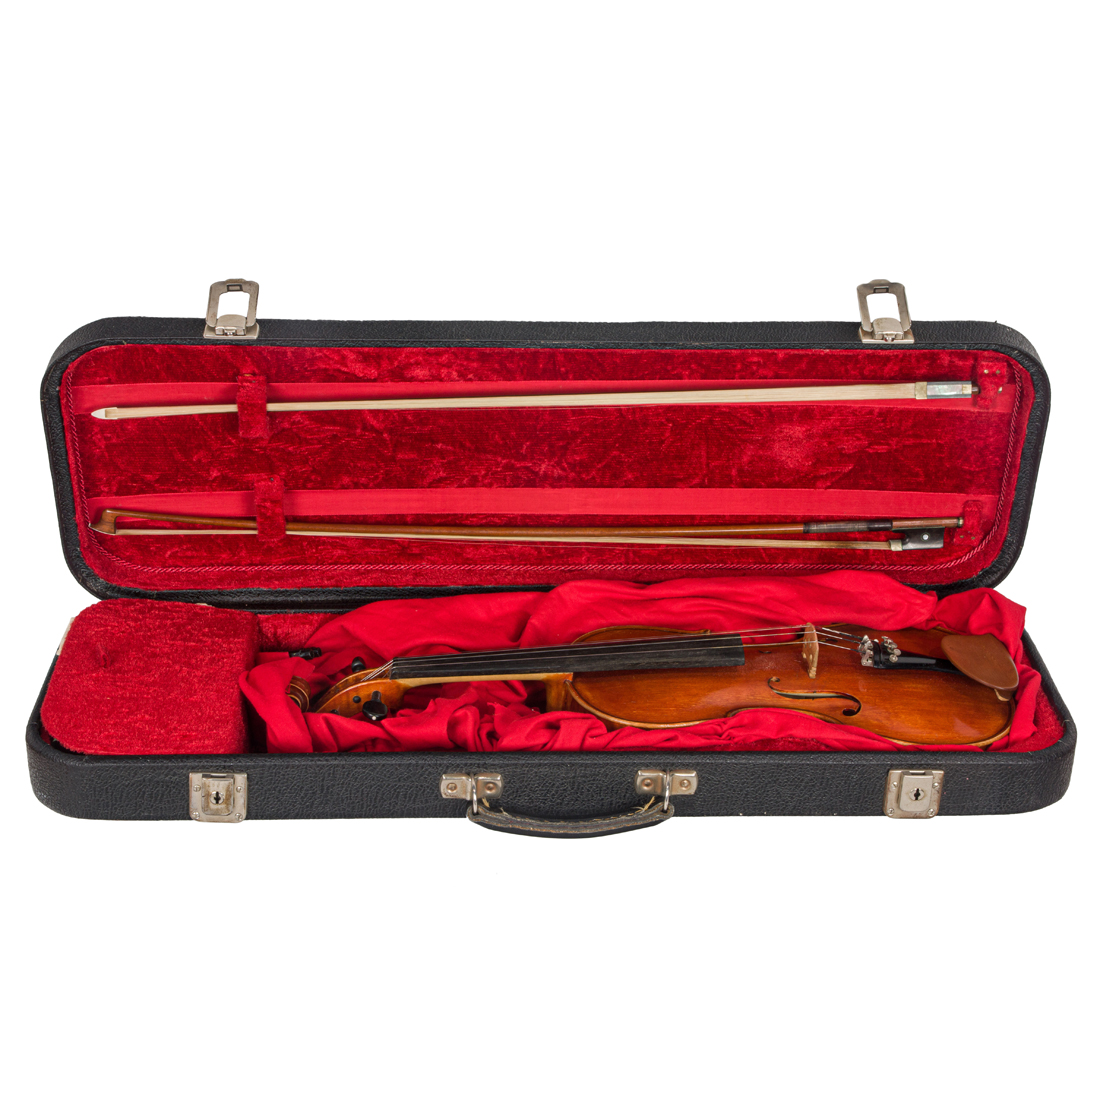 MODERN VIOLIN WITH A FLAMED MAPLE 3a190f